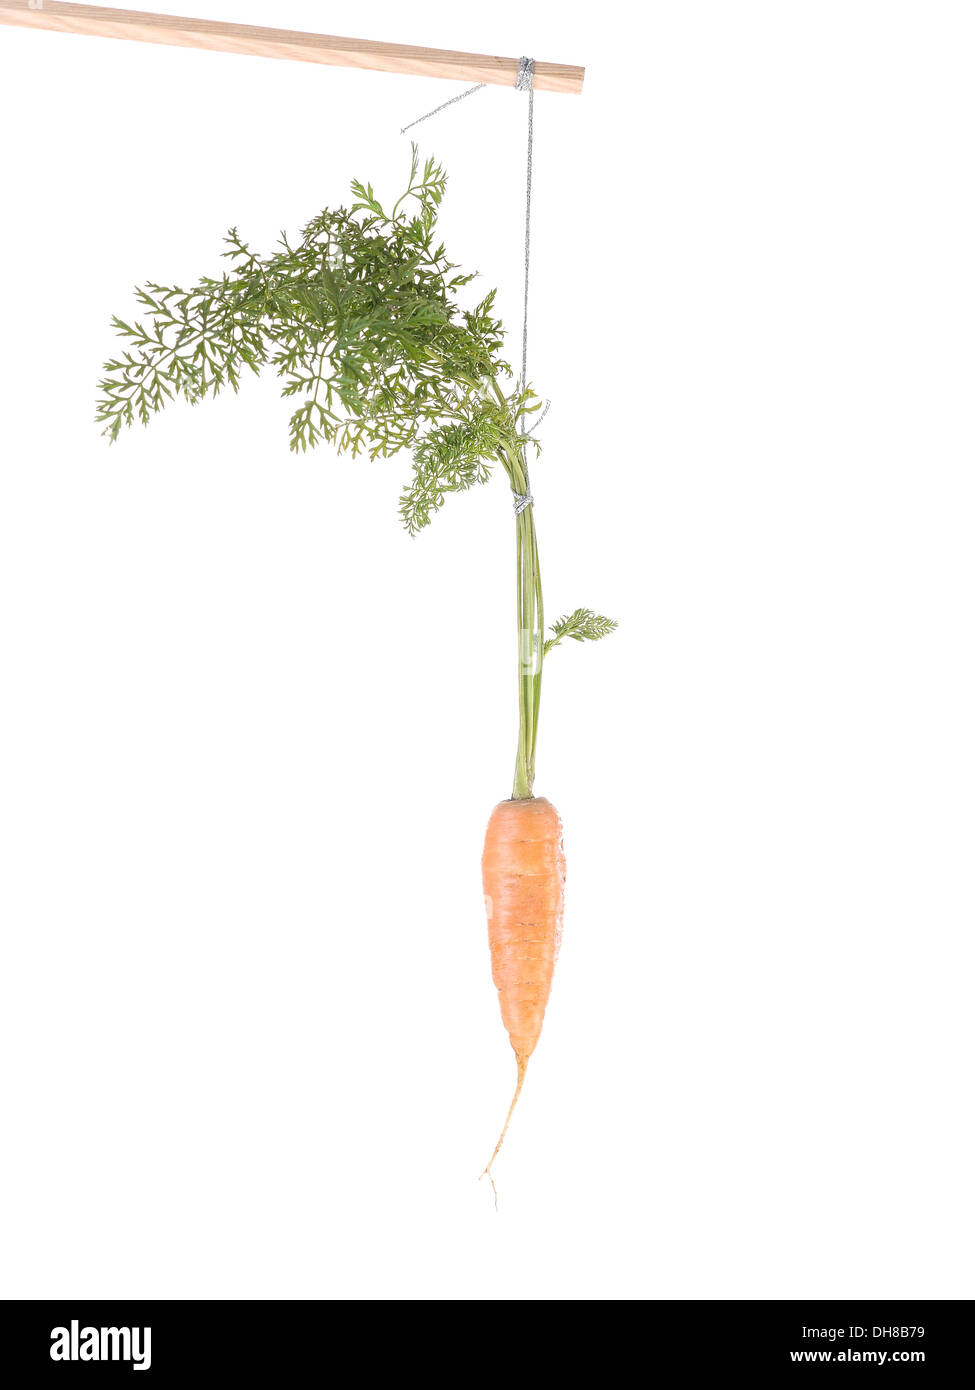 Carrot hanging on a string attached to a stick as Carrot and stick approach metaphor Stock Photo